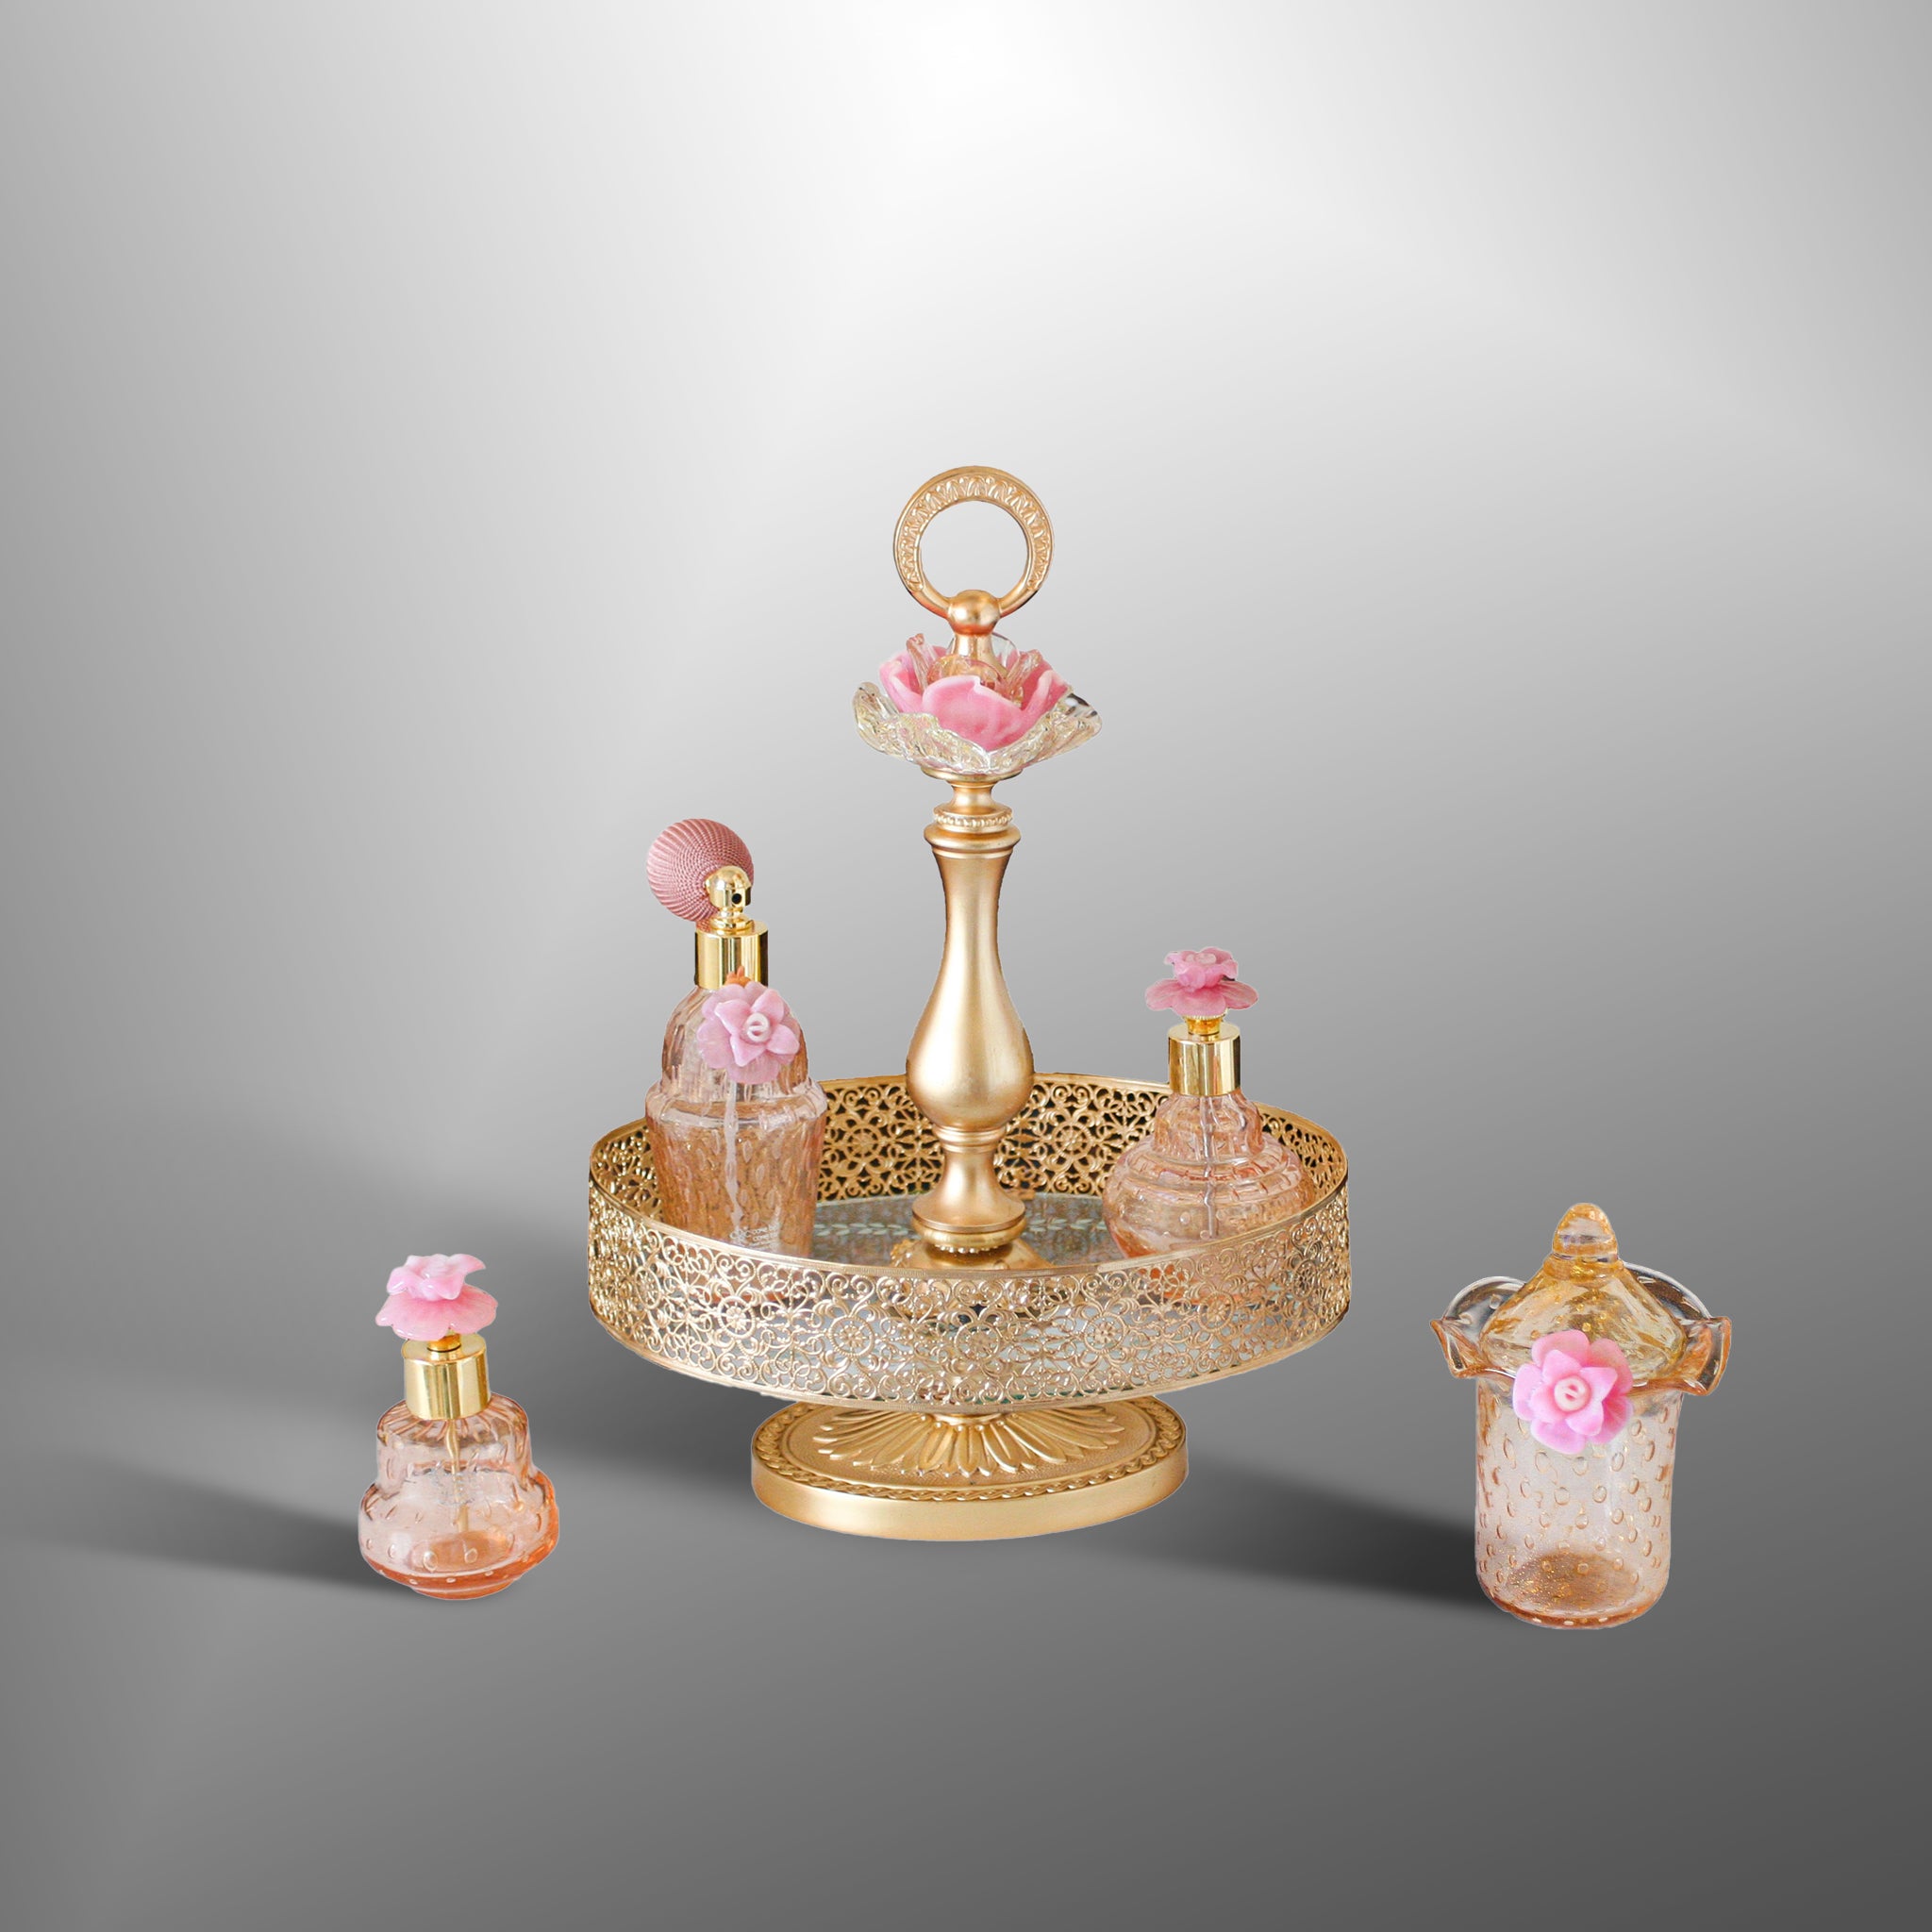 Parfume bottles in with Pink flowers